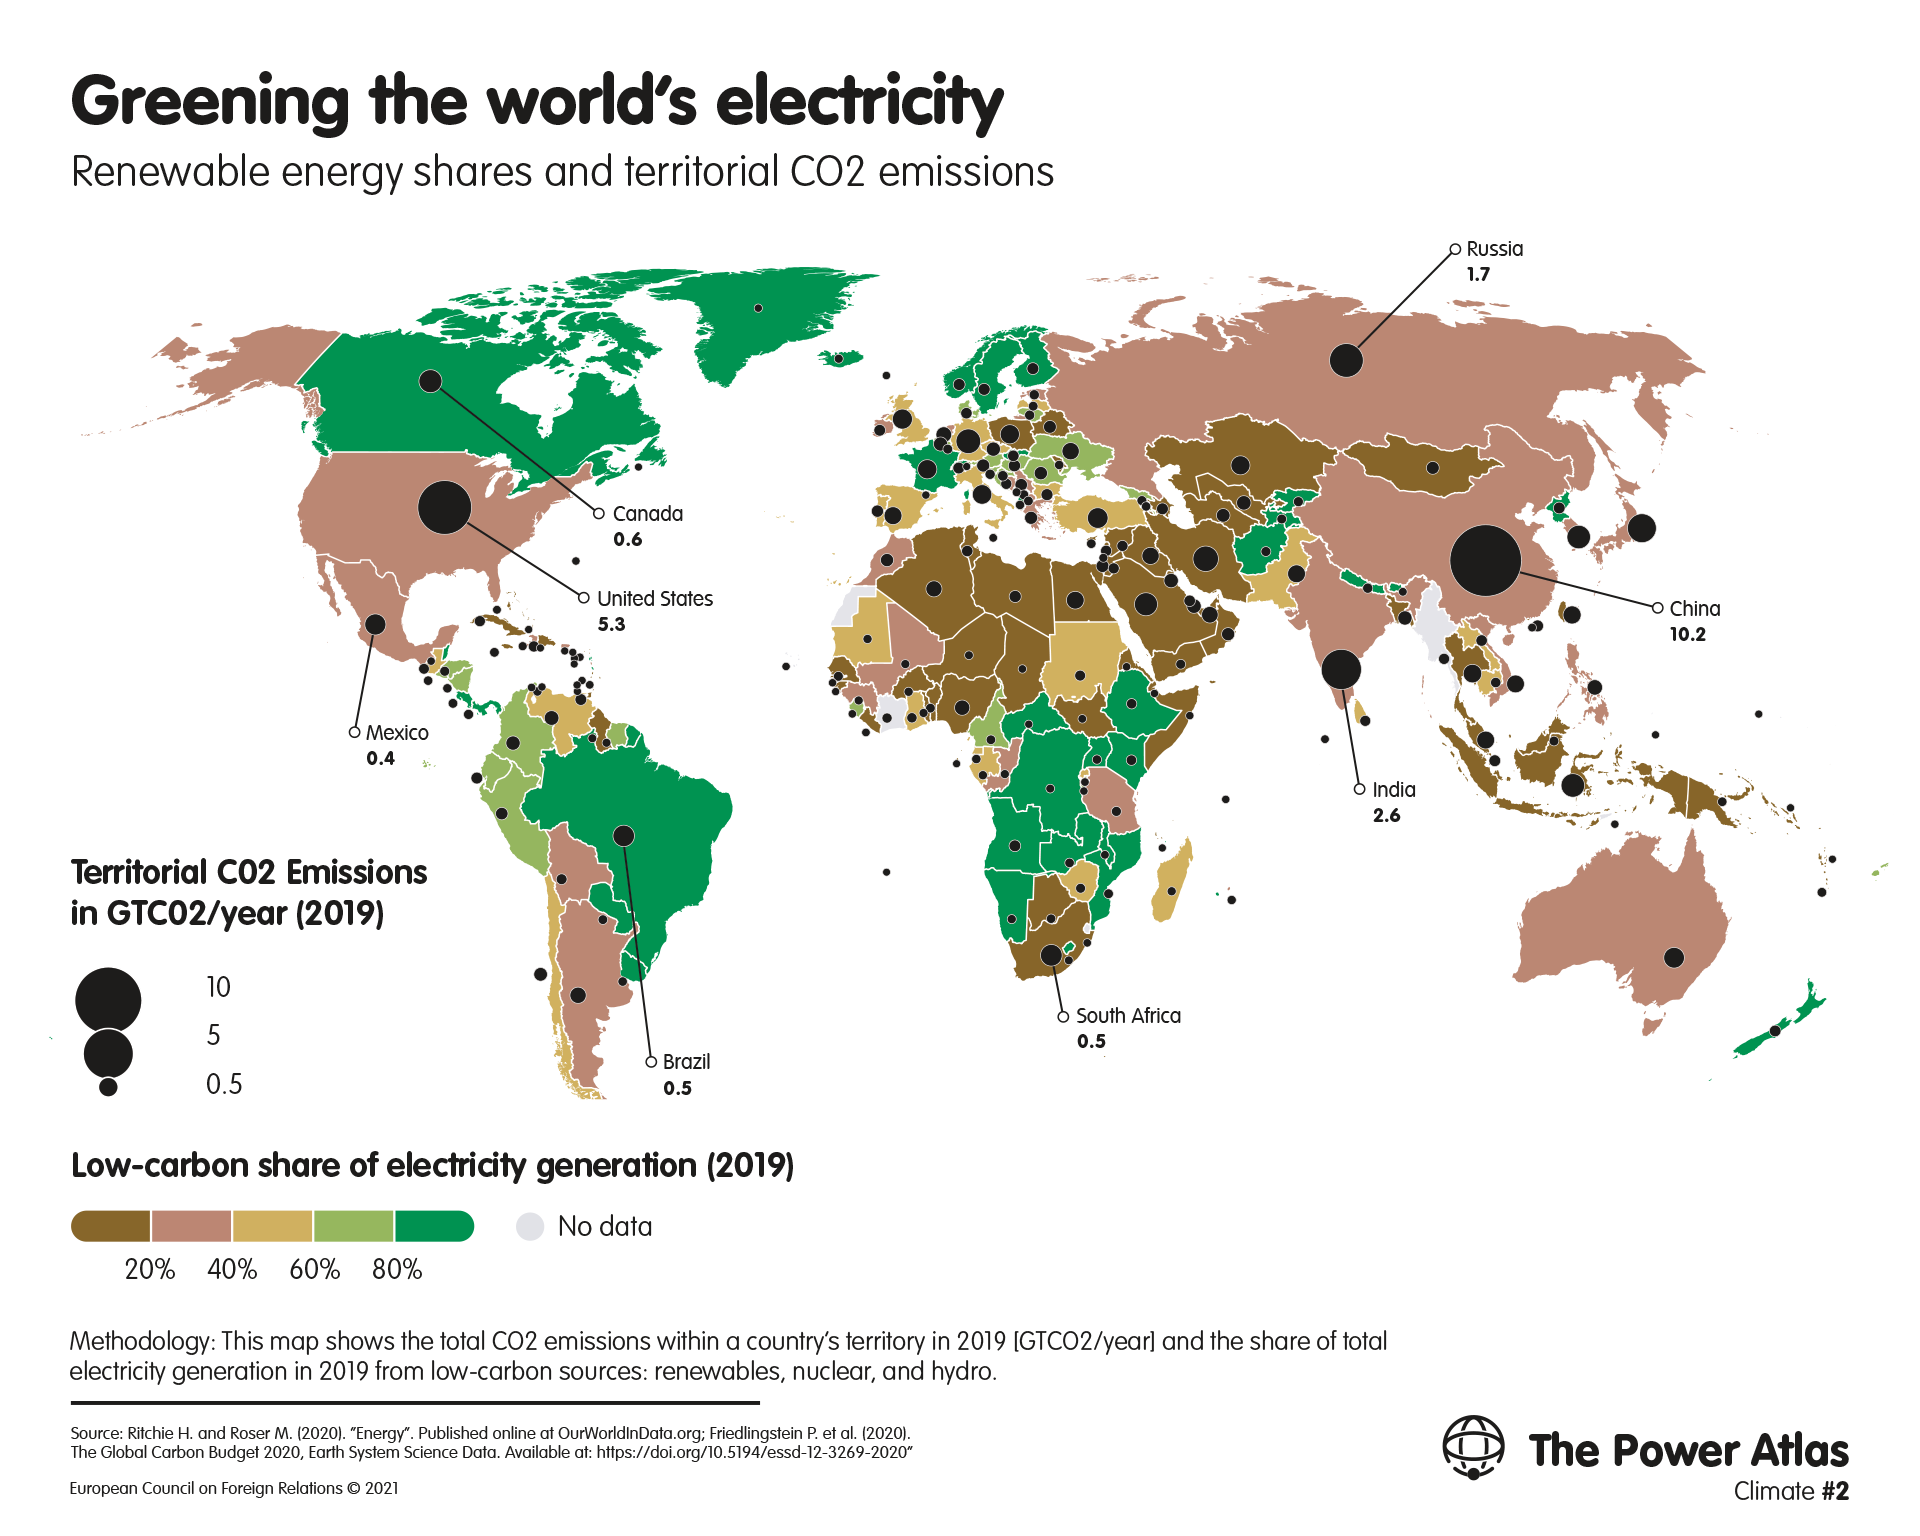 Greening the world's electricity: Renewable energy shares and territorial CO2 emissions